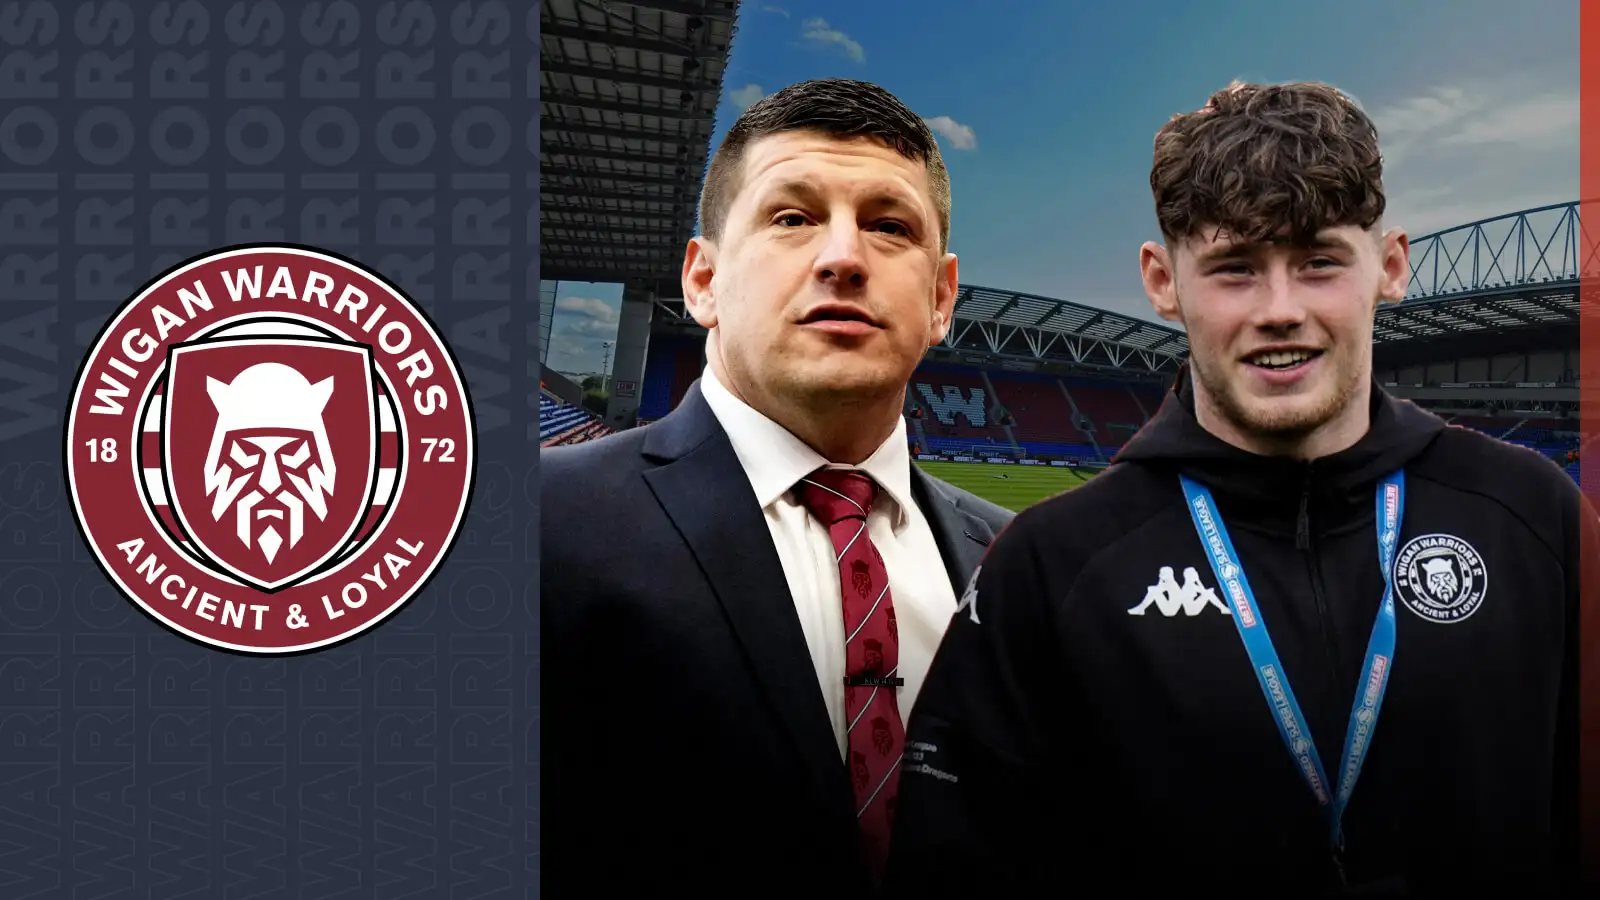 Access all areas inside the world-famous Wigan Warriors academy shaping stars of the future